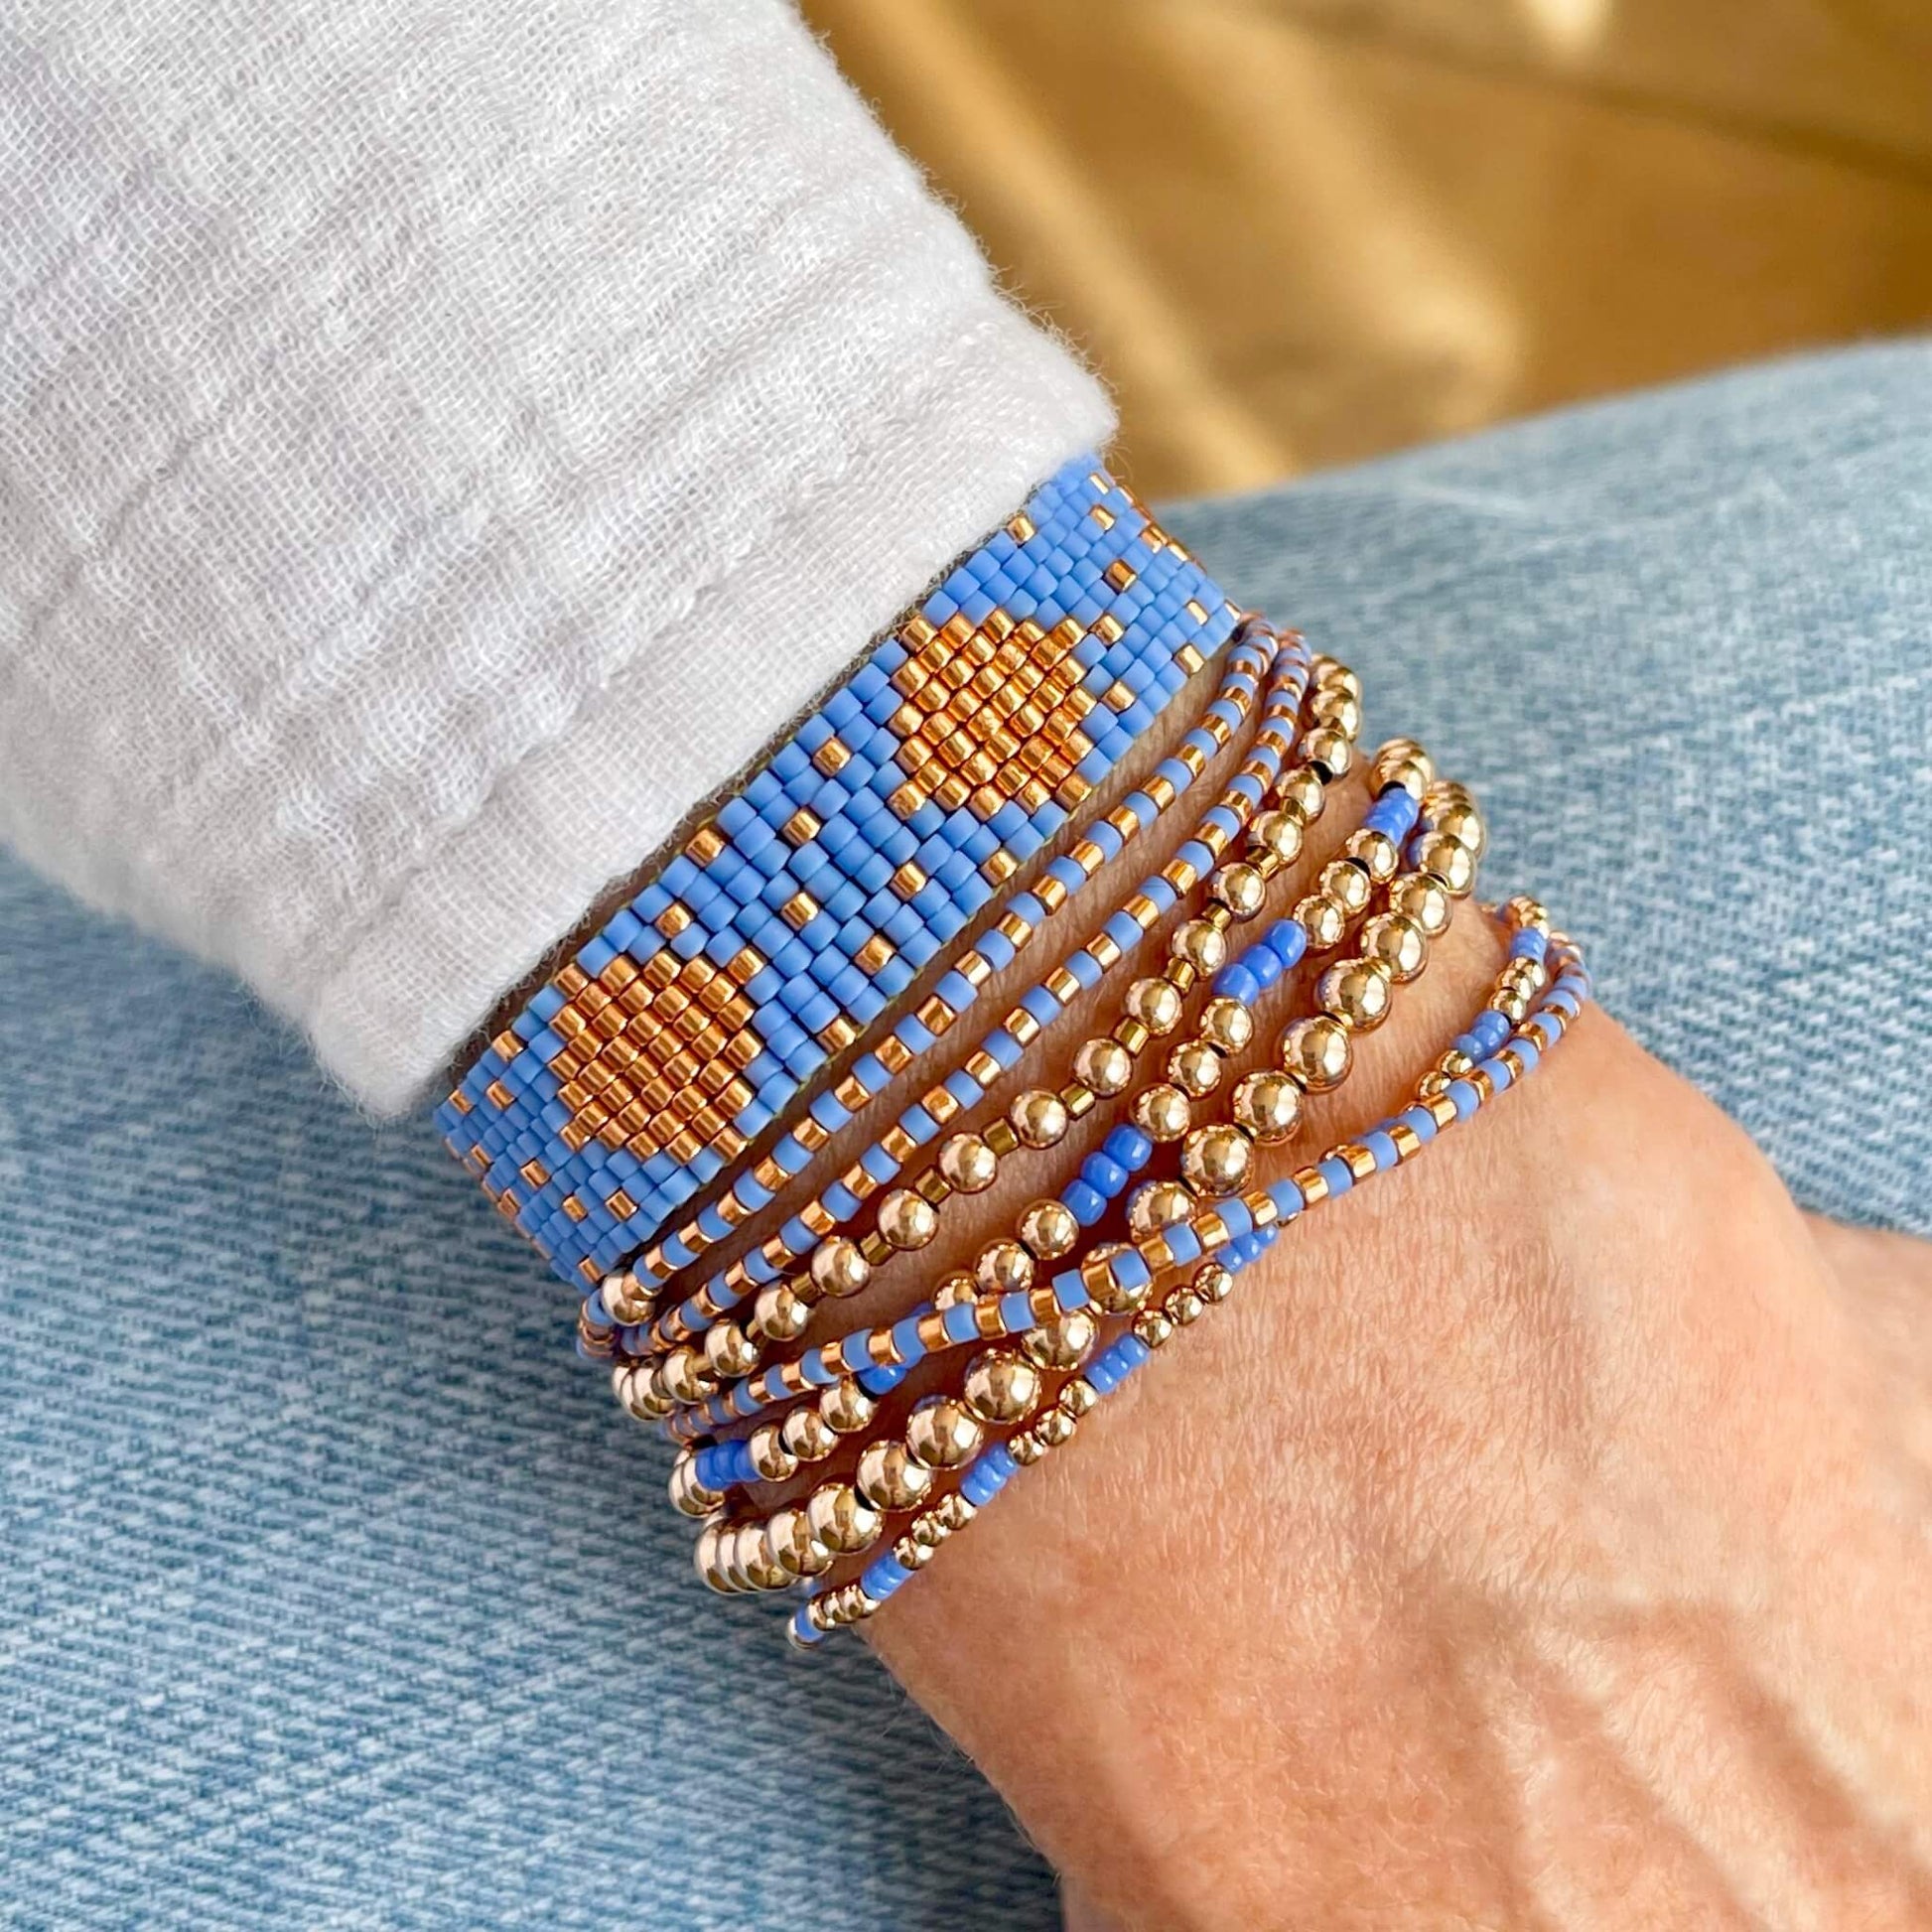 Bracelet stack featuring small blue glass seed beads, and 14K rose gold filled  round beads.